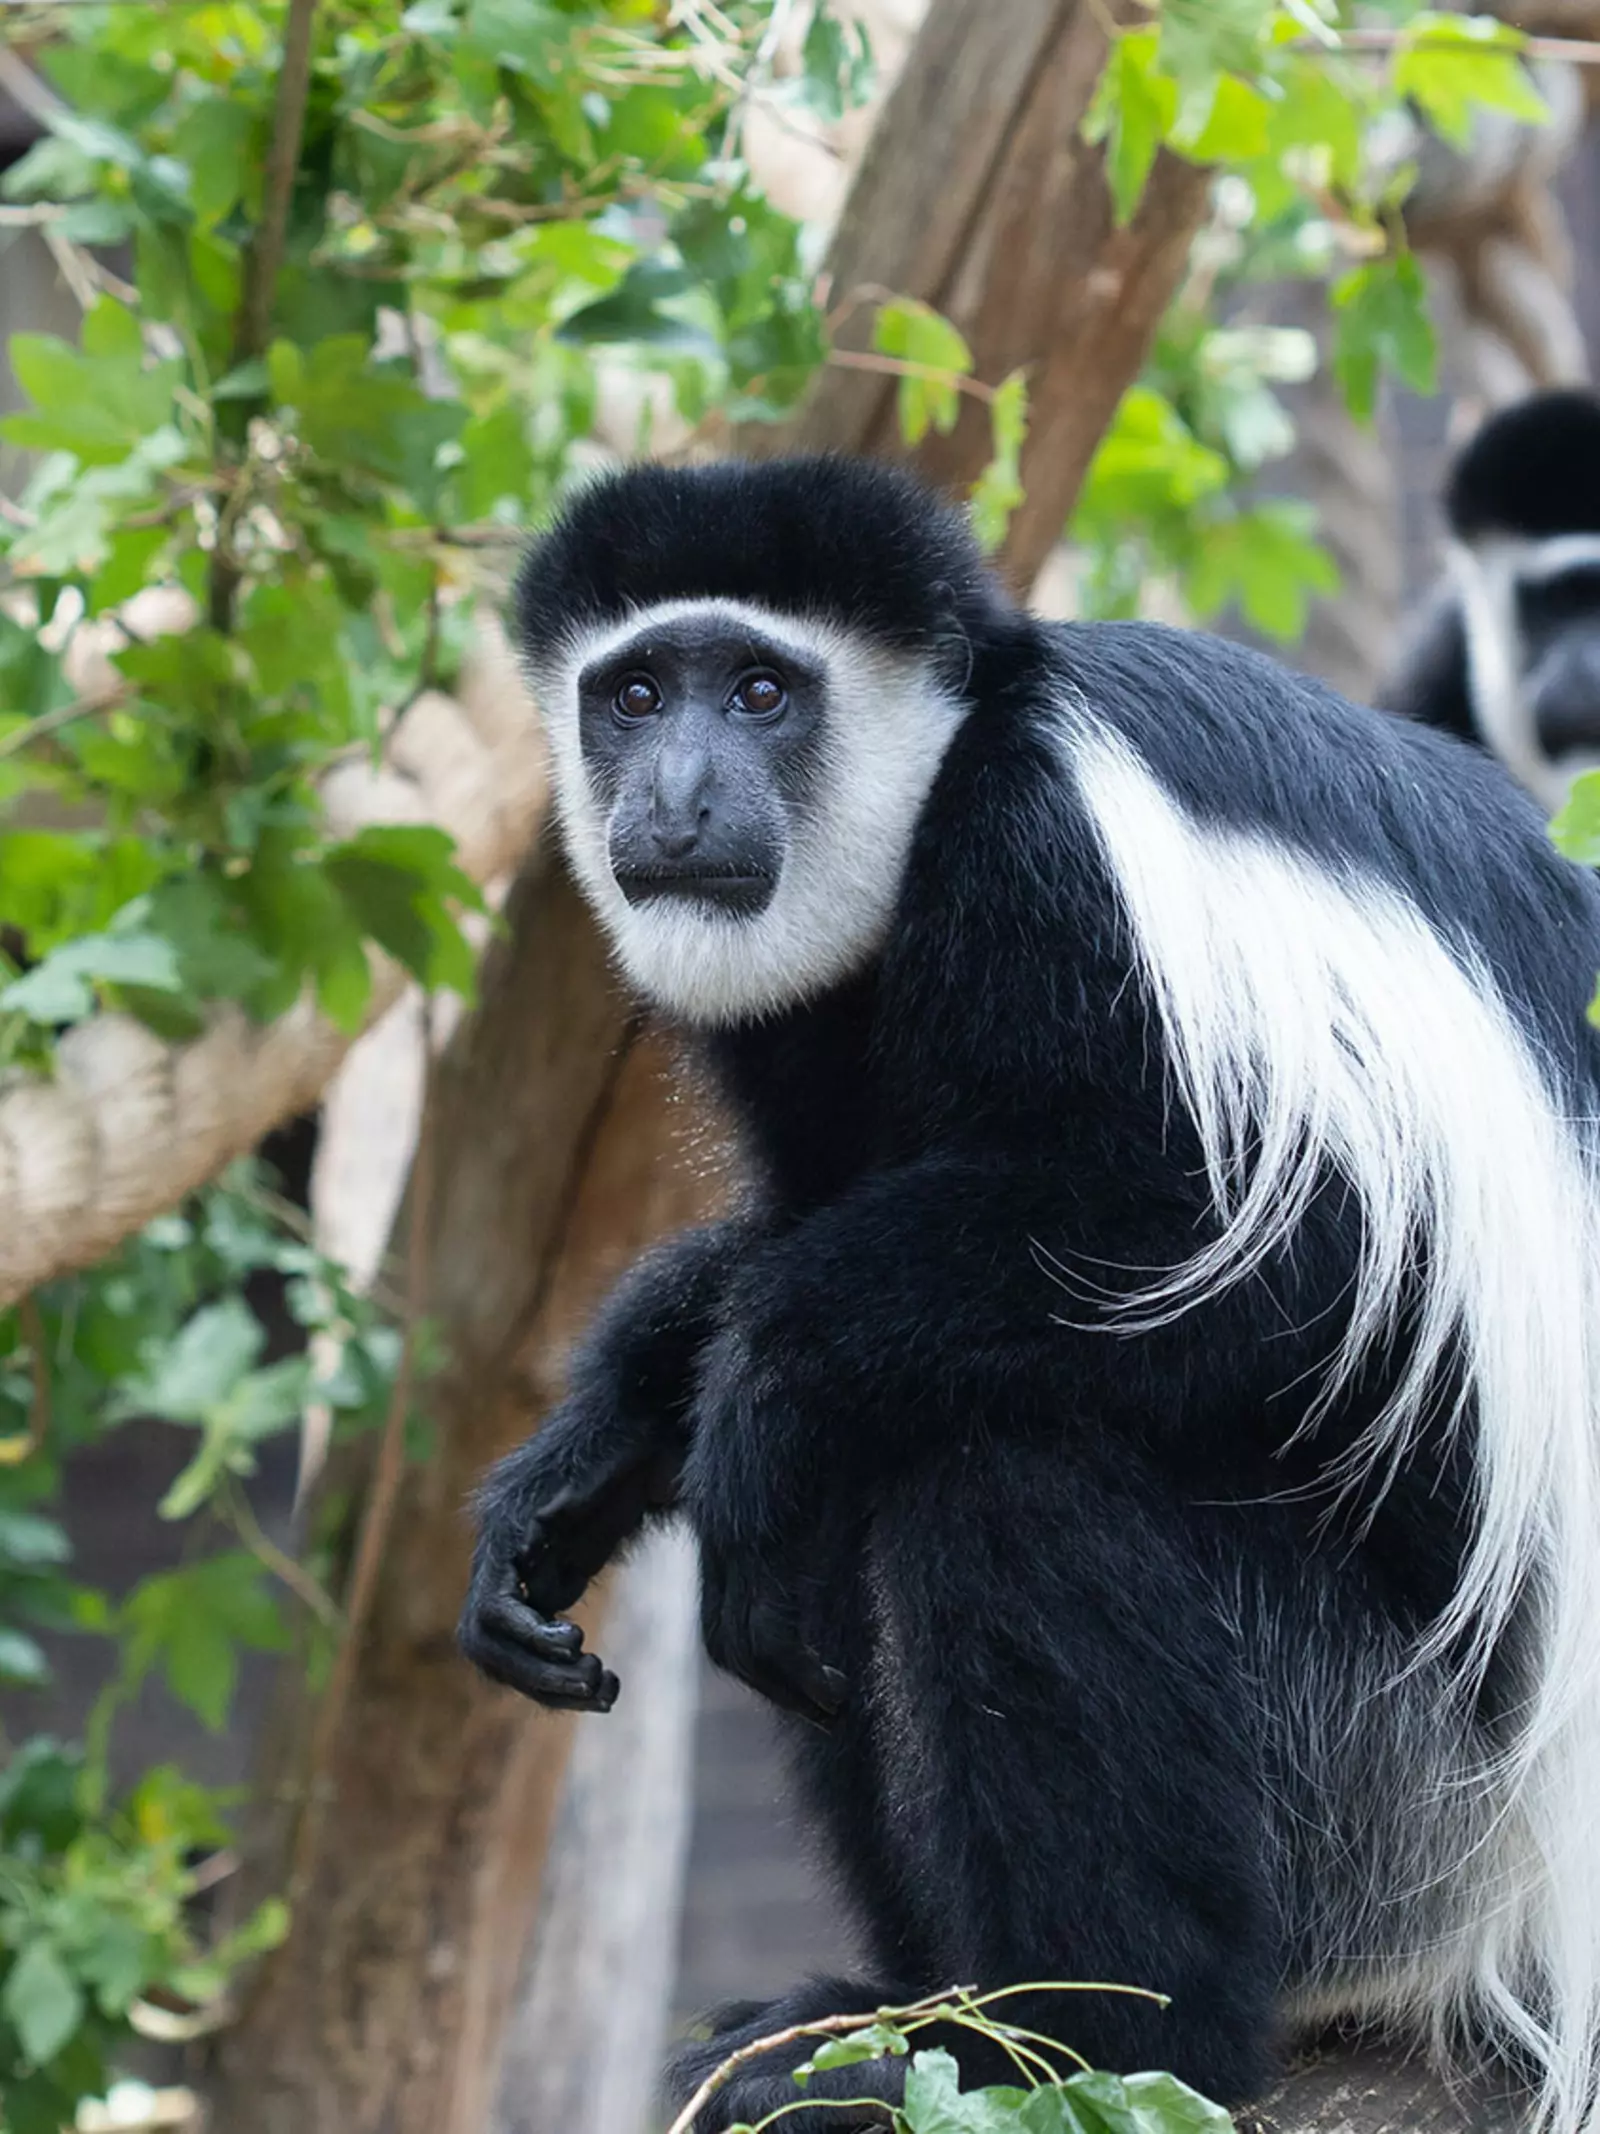 Two colobus monkeys sitting on a tree branch